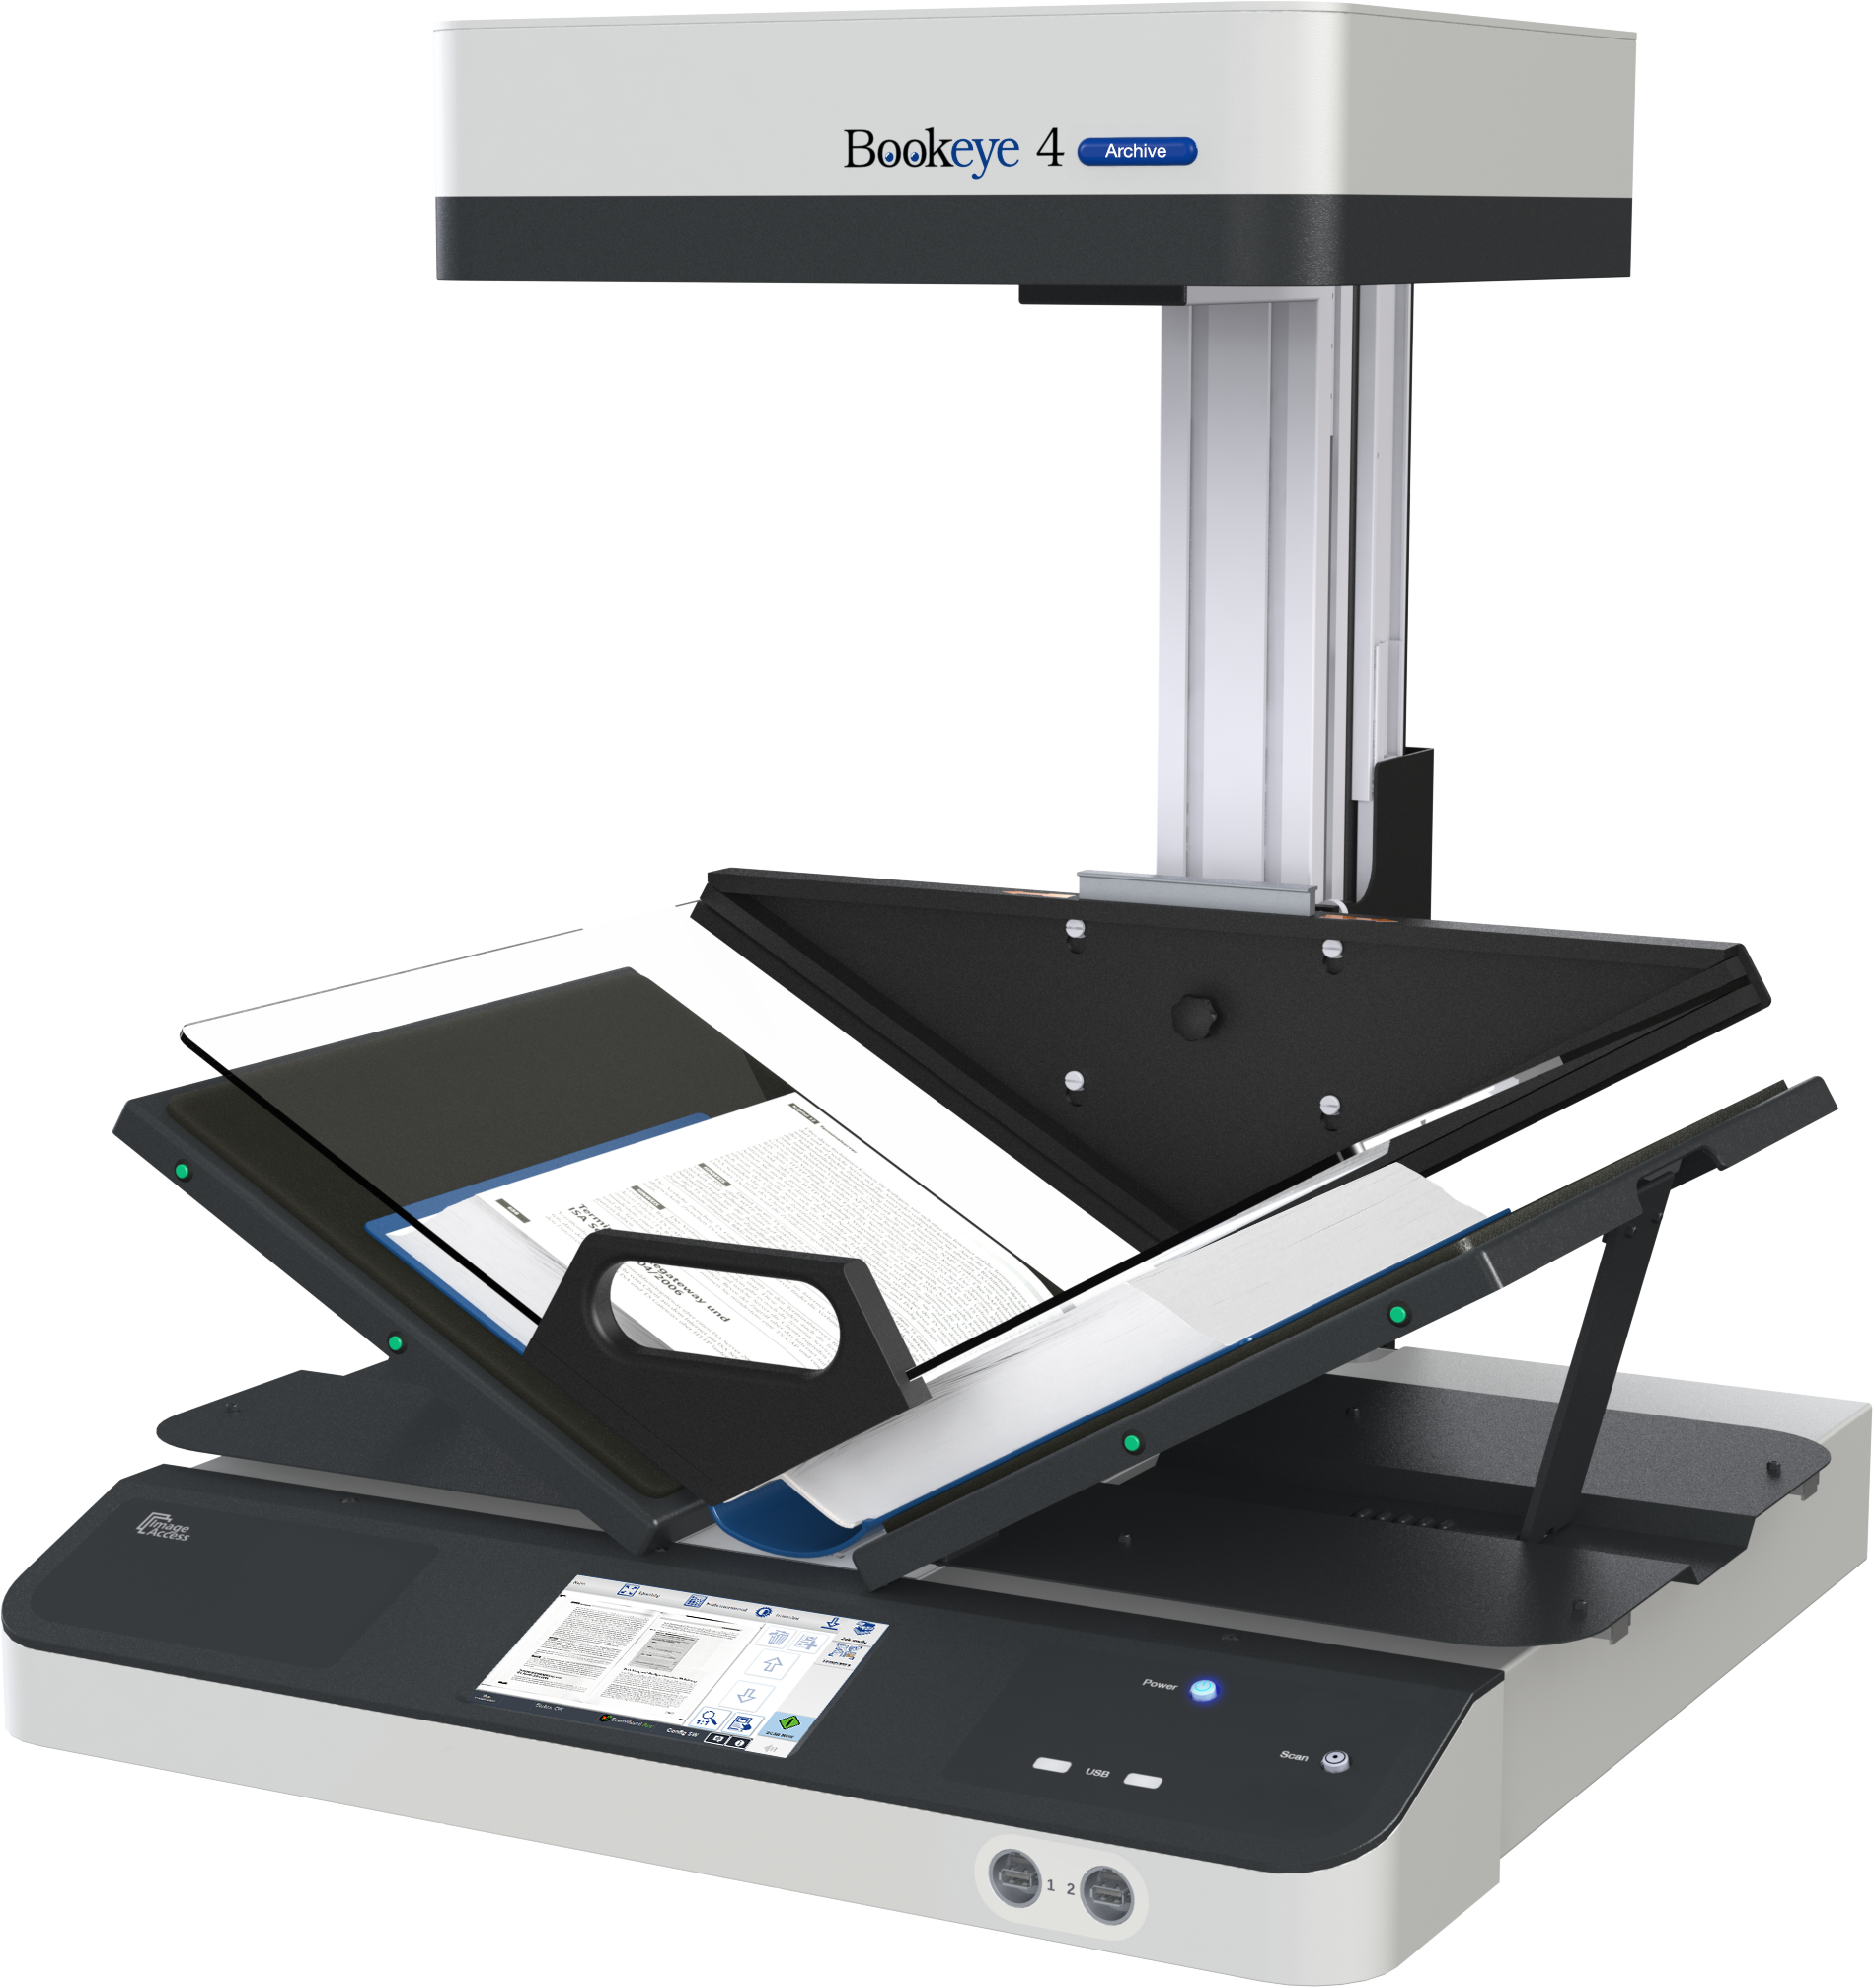 BOOKEYE 4 V2 PROFESSIONAL ARCHIVE LARGE BOOK A2/C-SIZE SCANNER